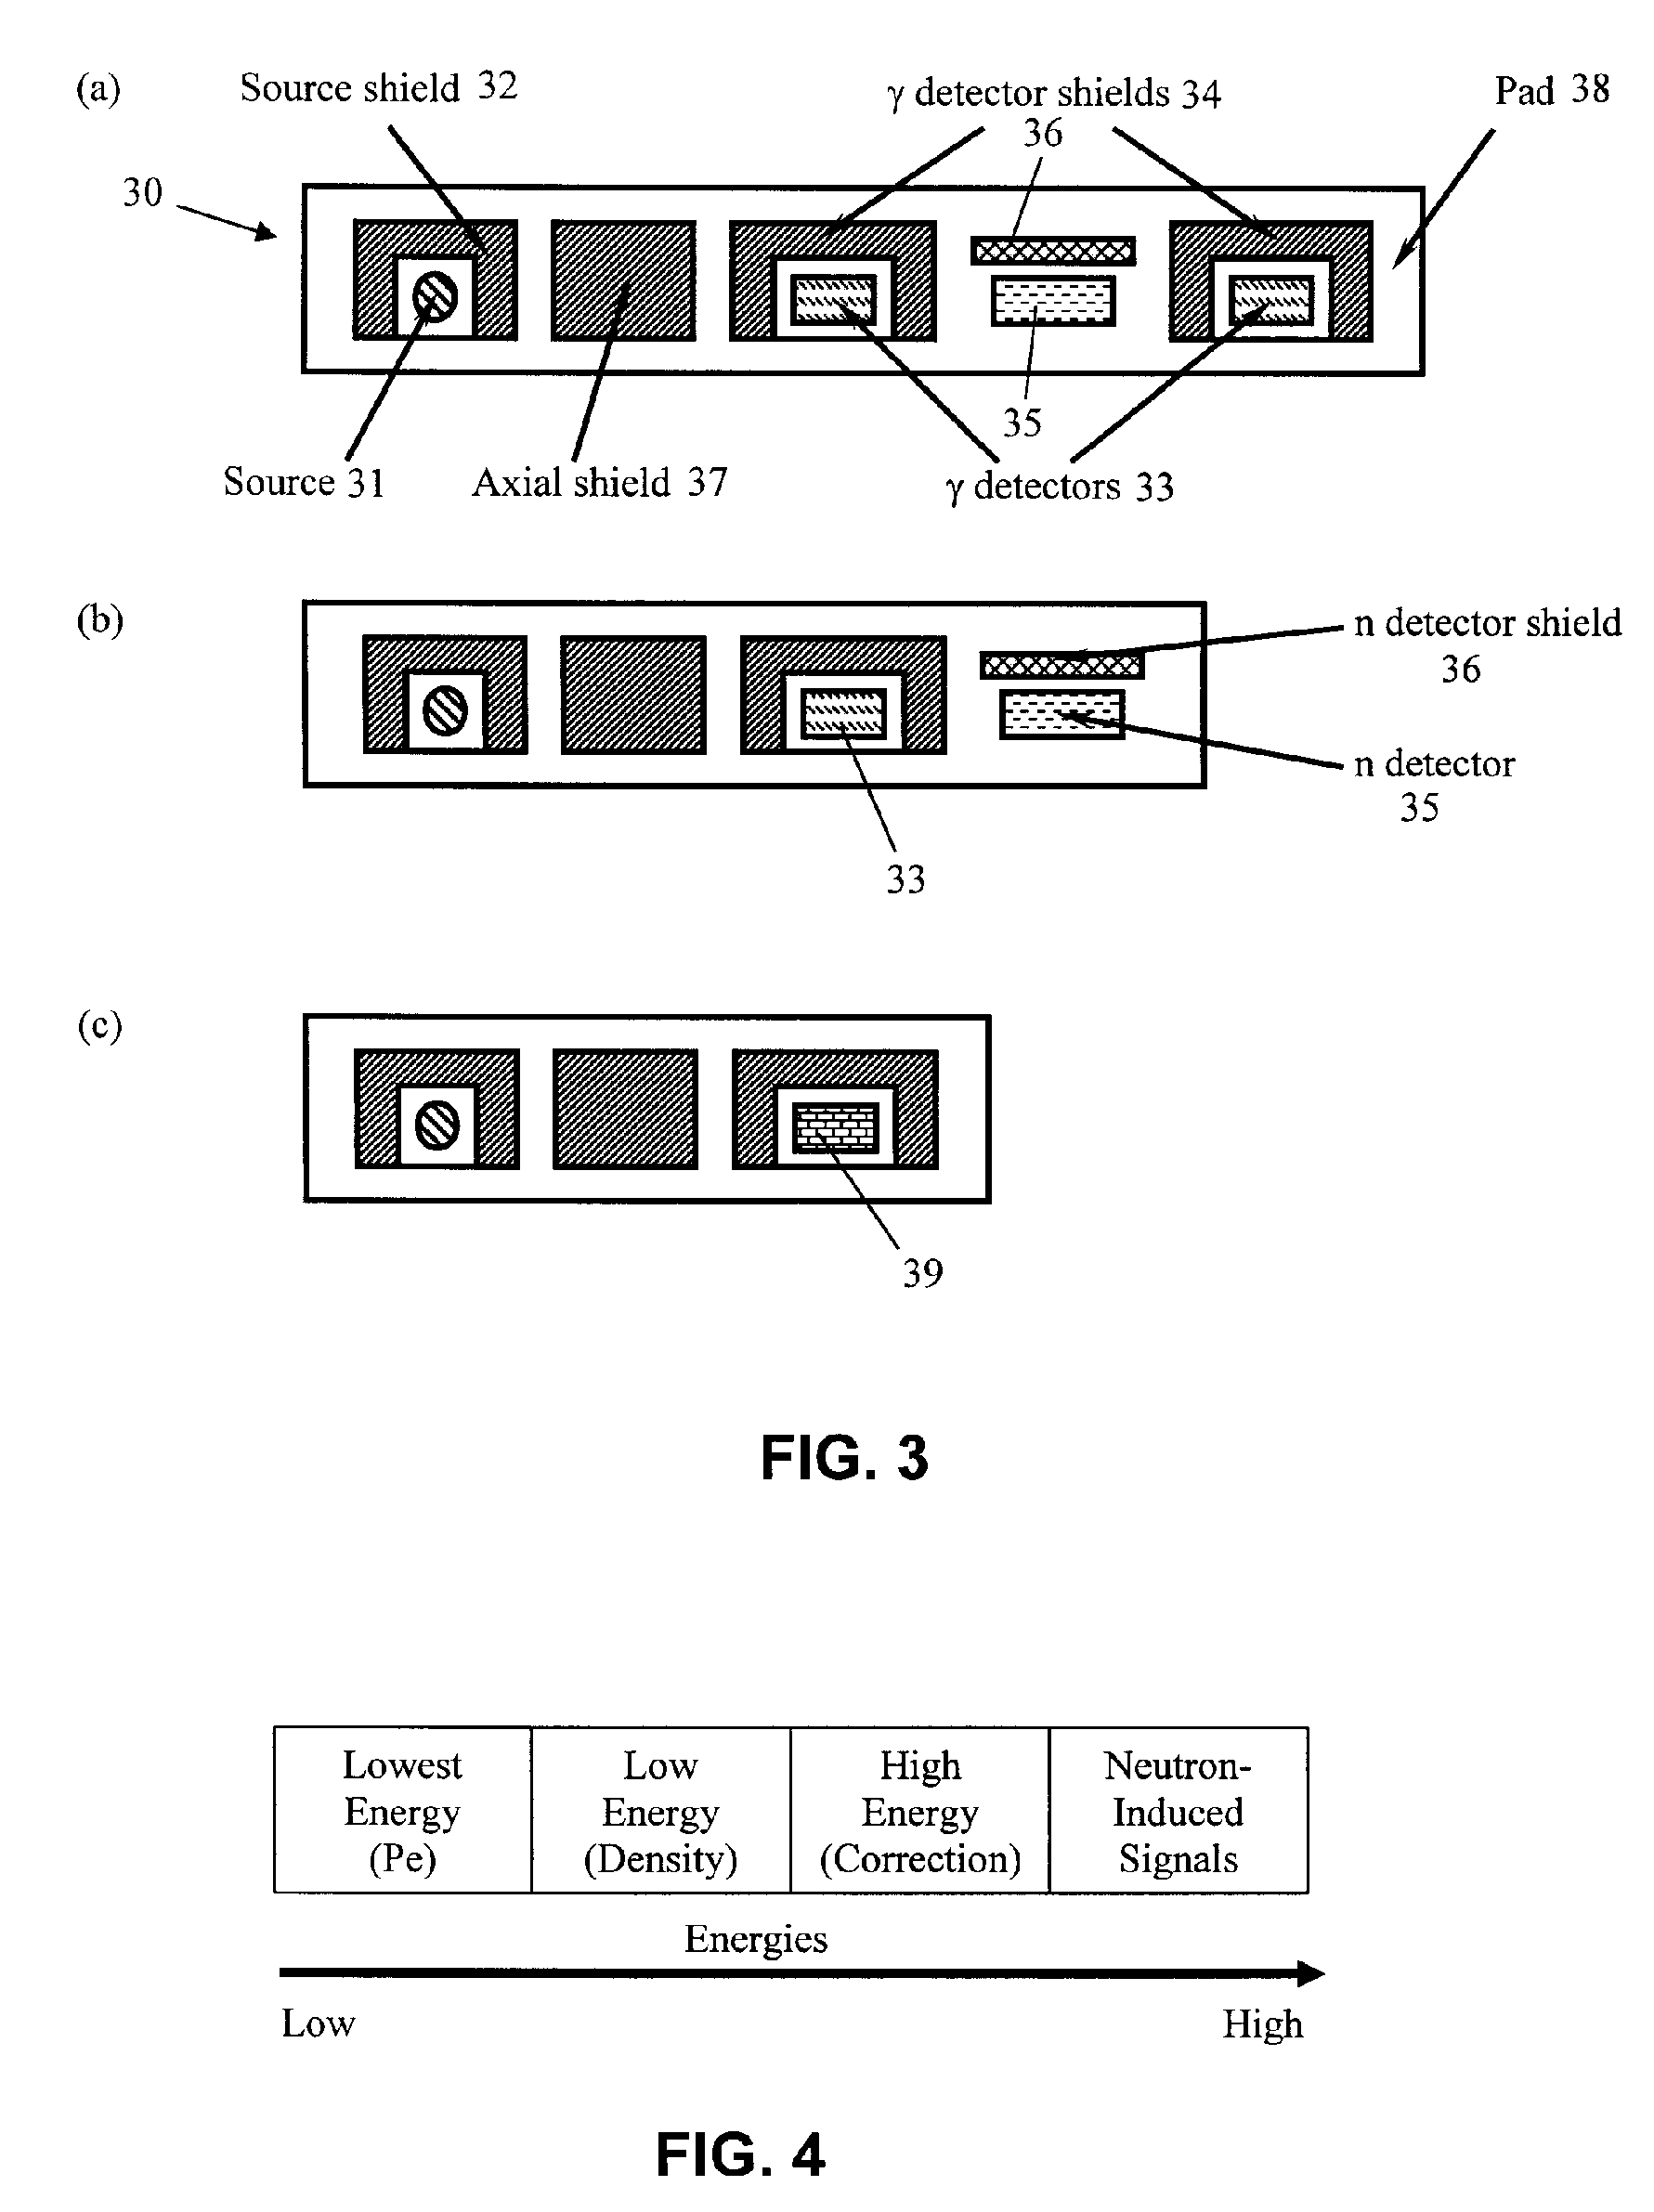 Apparatus and methods for interlaced density and neutron measurements